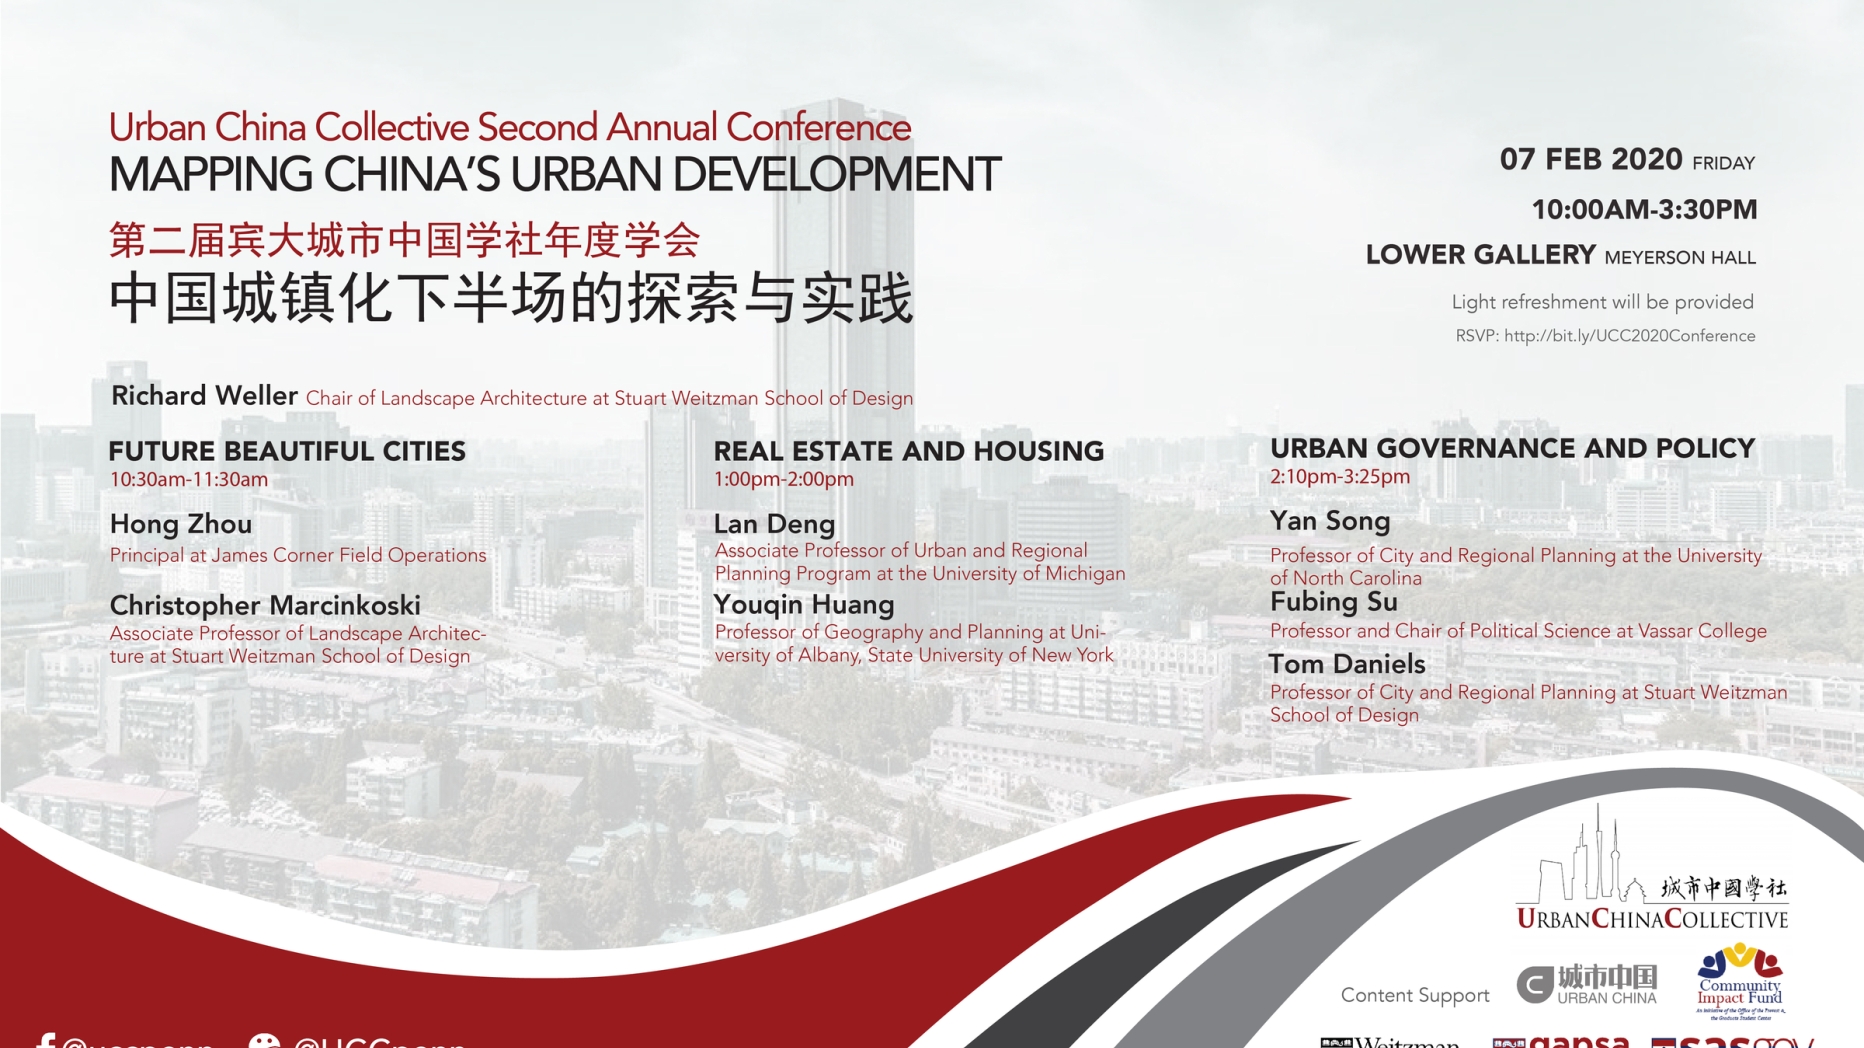 2020 Second Annual Conference "Mapping China's Urban Development" Poster